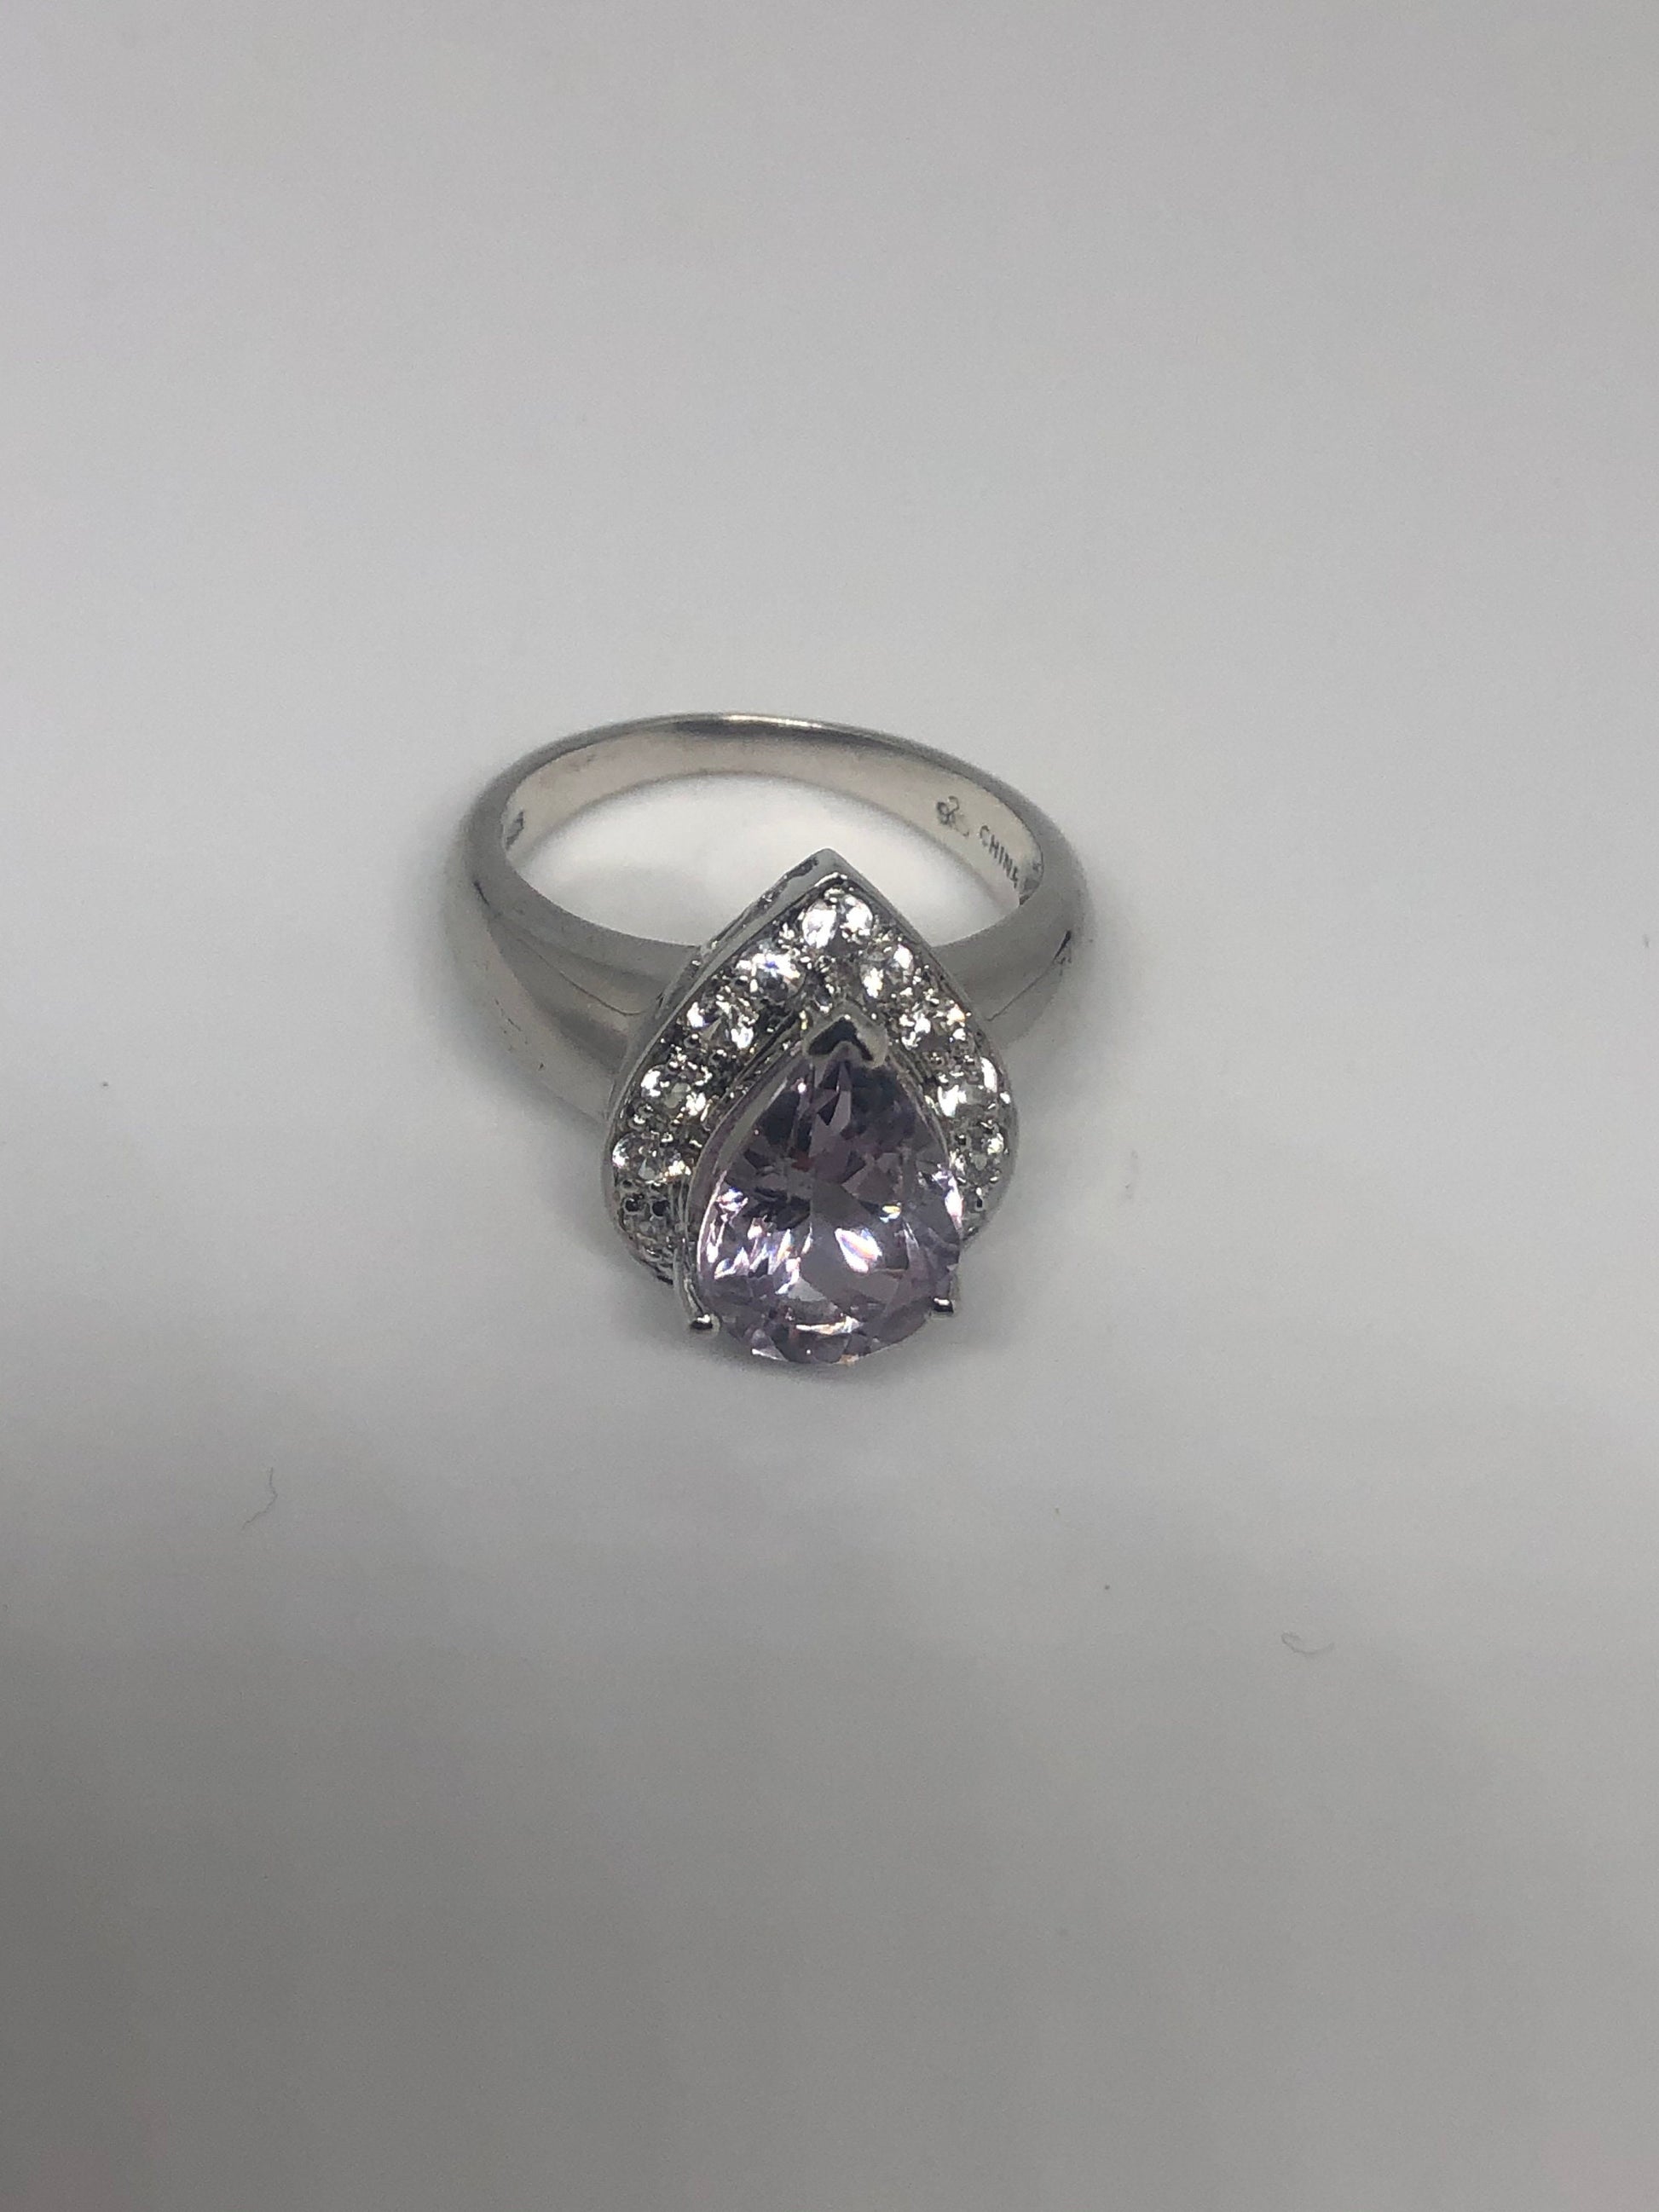 Vintage Purple Amethyst Heart Ring 925 Sterling Silver Gothic Size 7